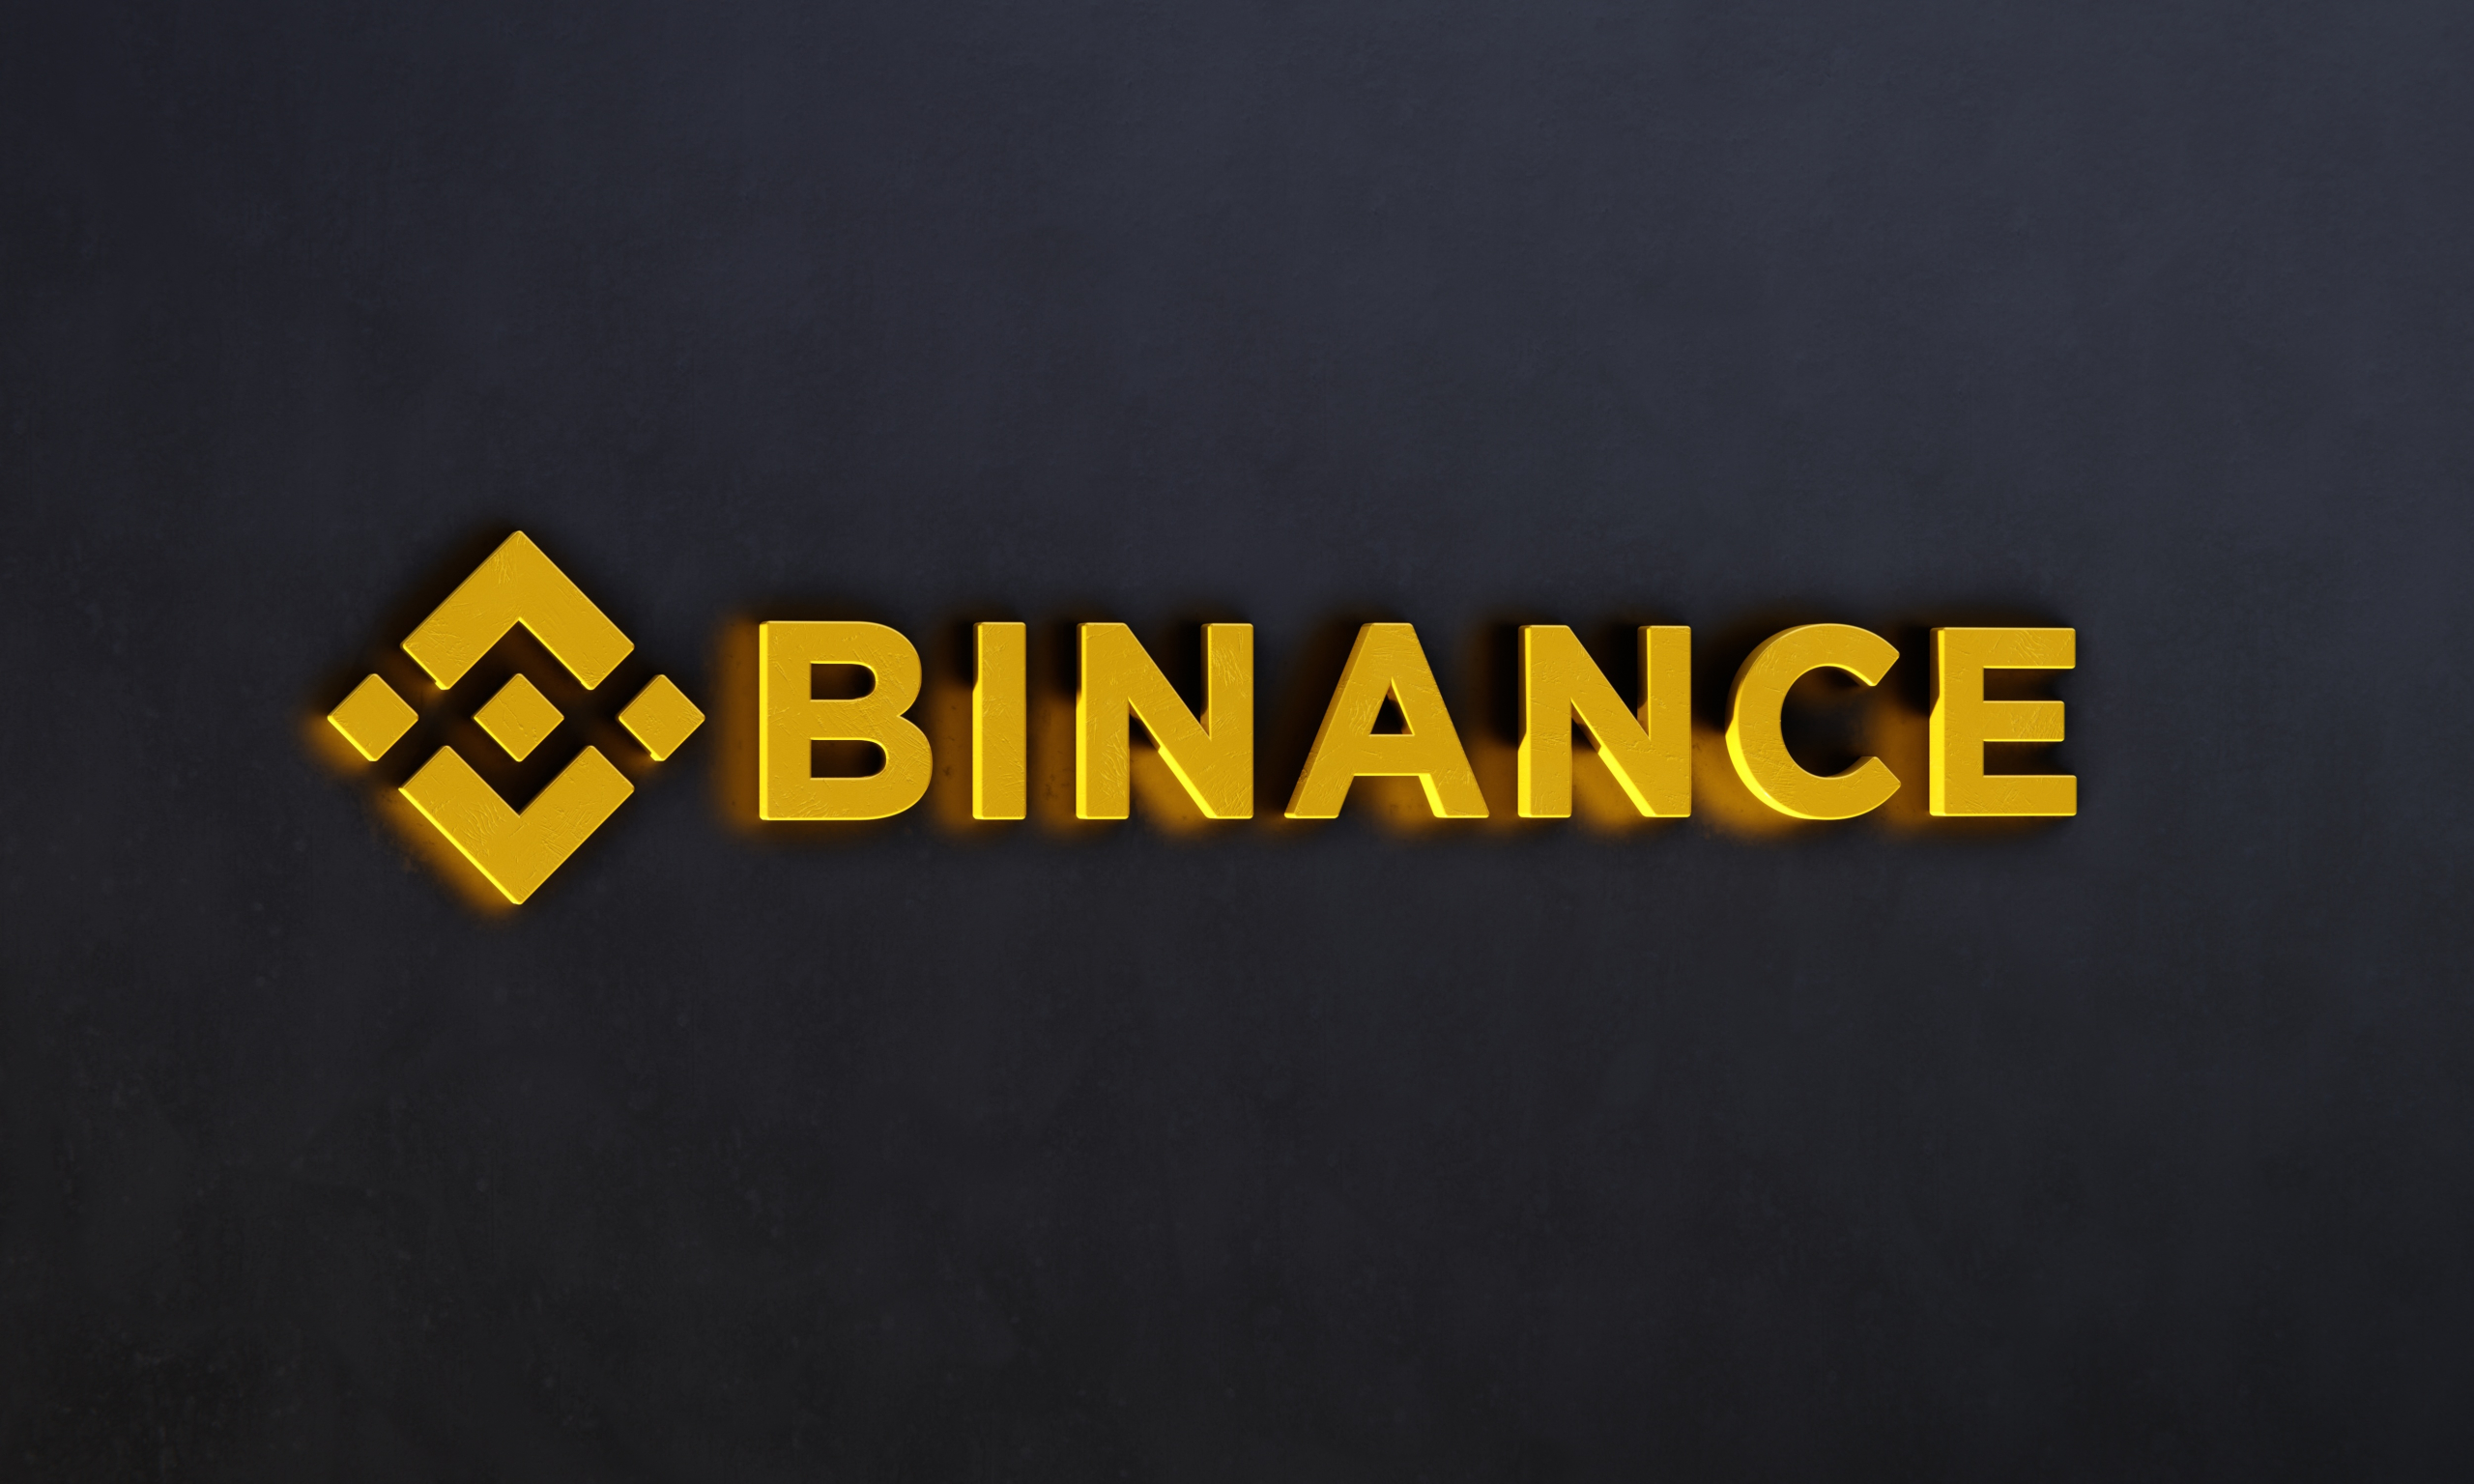 Binance is in talks with the regulator to obtain a license to operate in Germany